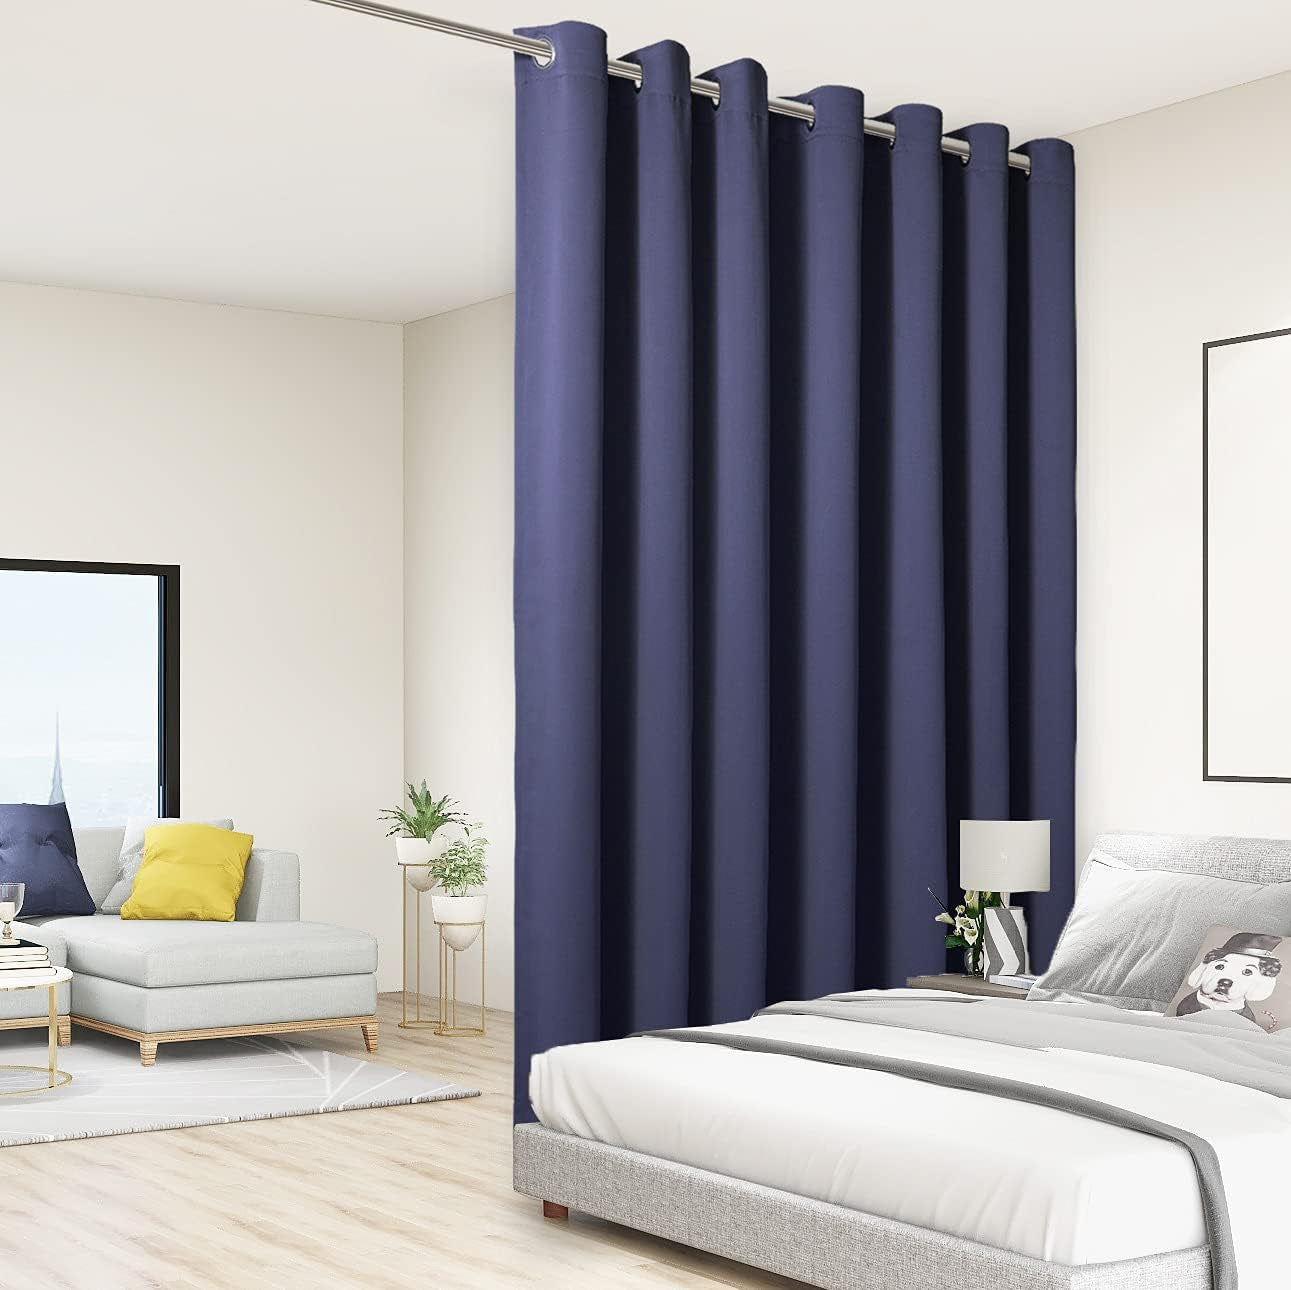 BONZER Room Divider Curtain Total Privacy Wall Grommet Thermal Insulated Soundproof Extra Wide Blackout Curtains for Bedroom Living Room, 84L X 108W Inch (7L X 9W Ft), 1 Panel, Dark Grey  BONZER Navy 108.00" X 150.00" 